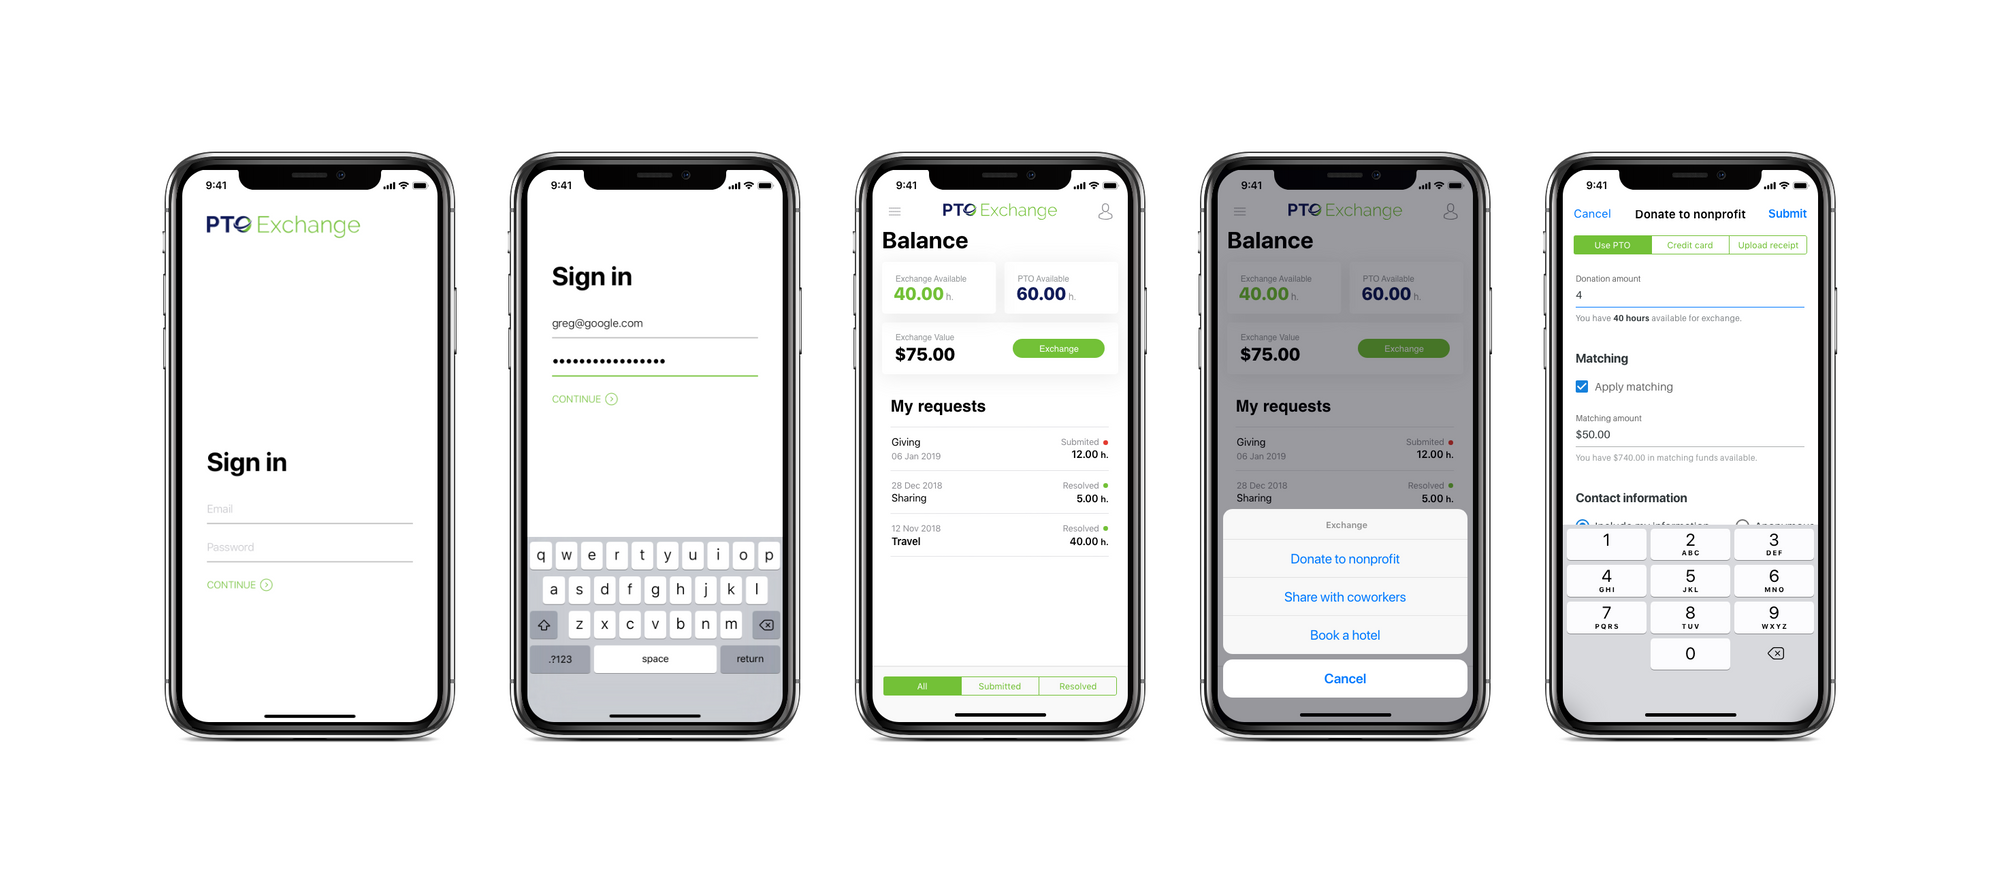 pto-exchange-mobile-sign-in-screens